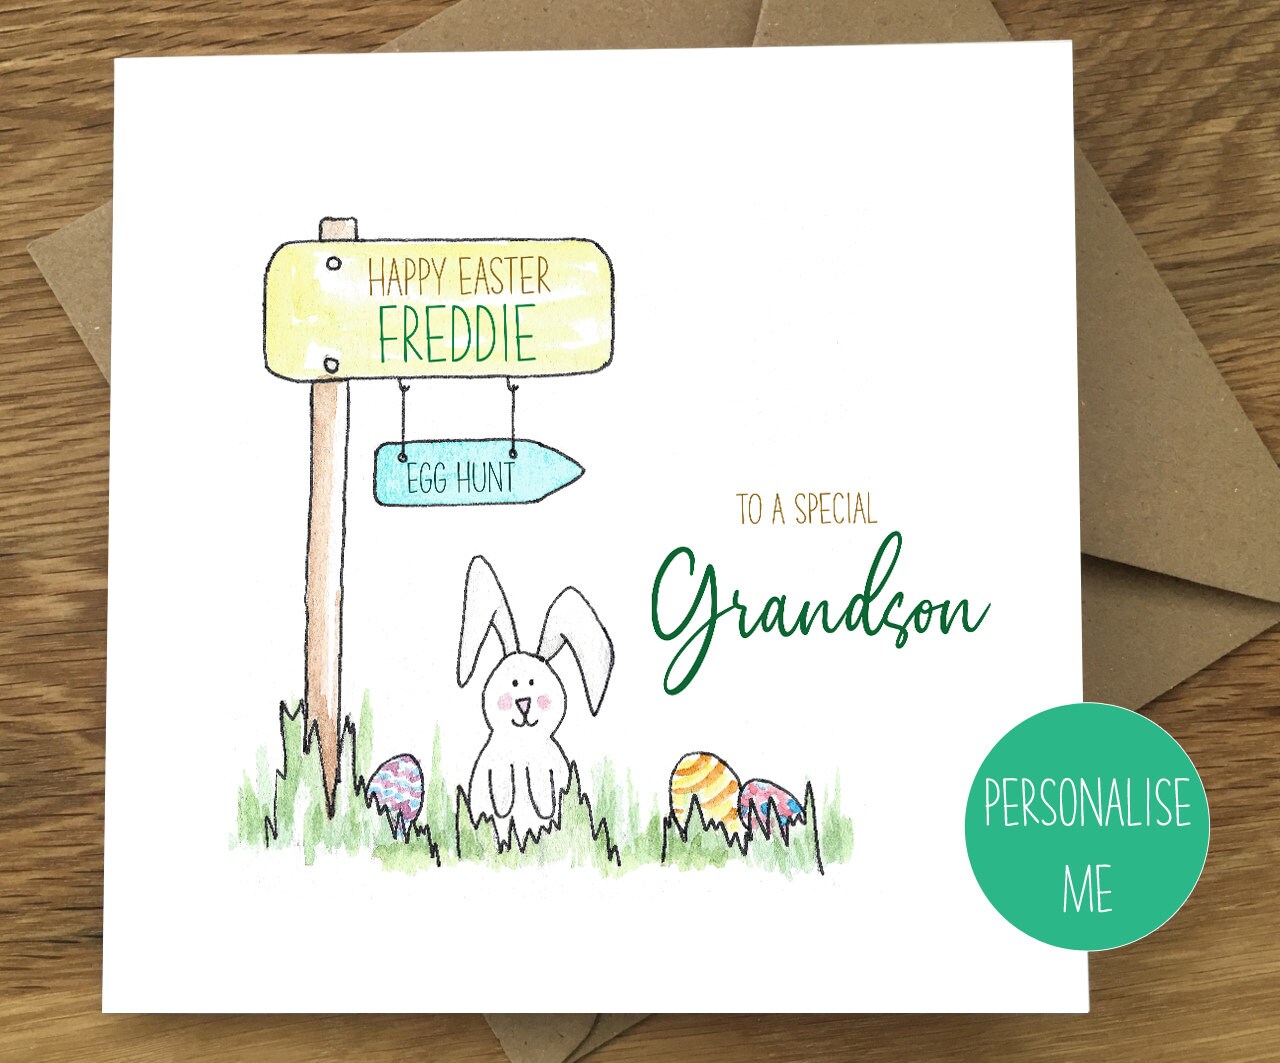 Pack of 10 Cute Fun Design Easter Cards and Envelopes Ideal for Kids Exclusive Limited Edition by Greetingles 